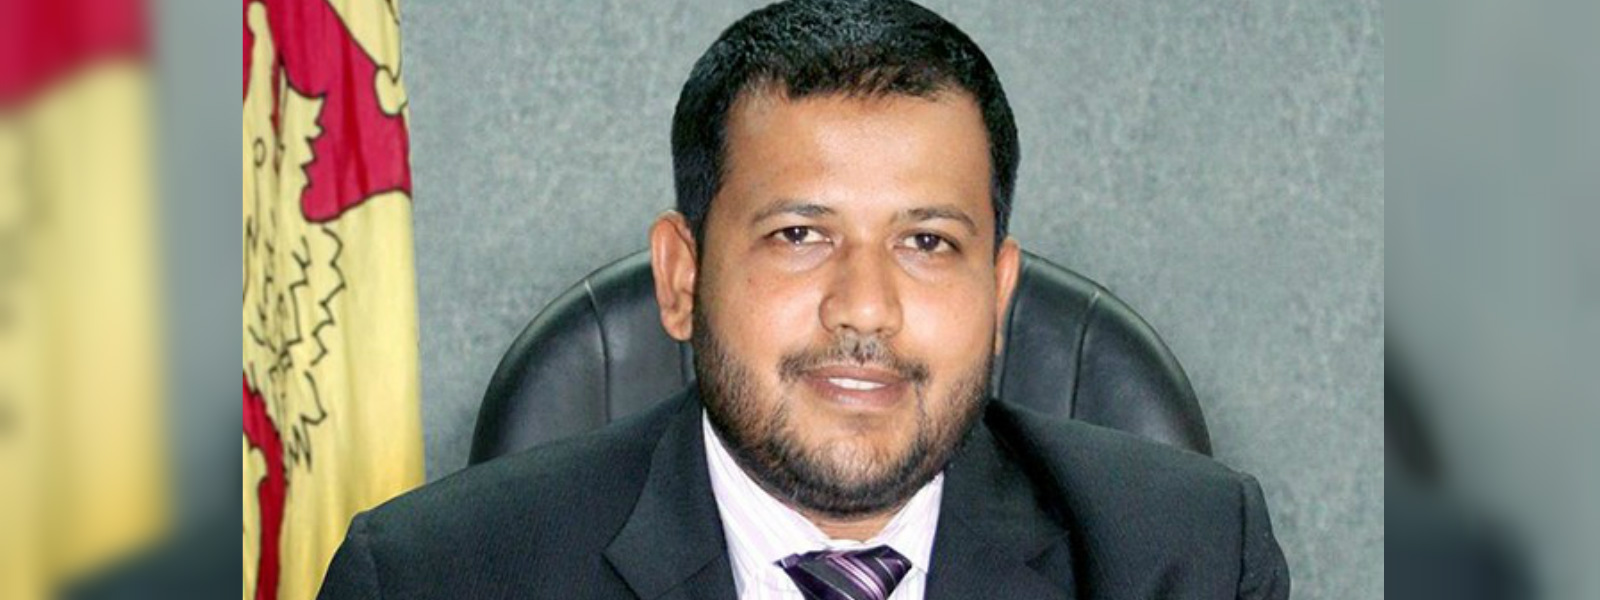 Min. Bathiudeen issues a warning to the Government